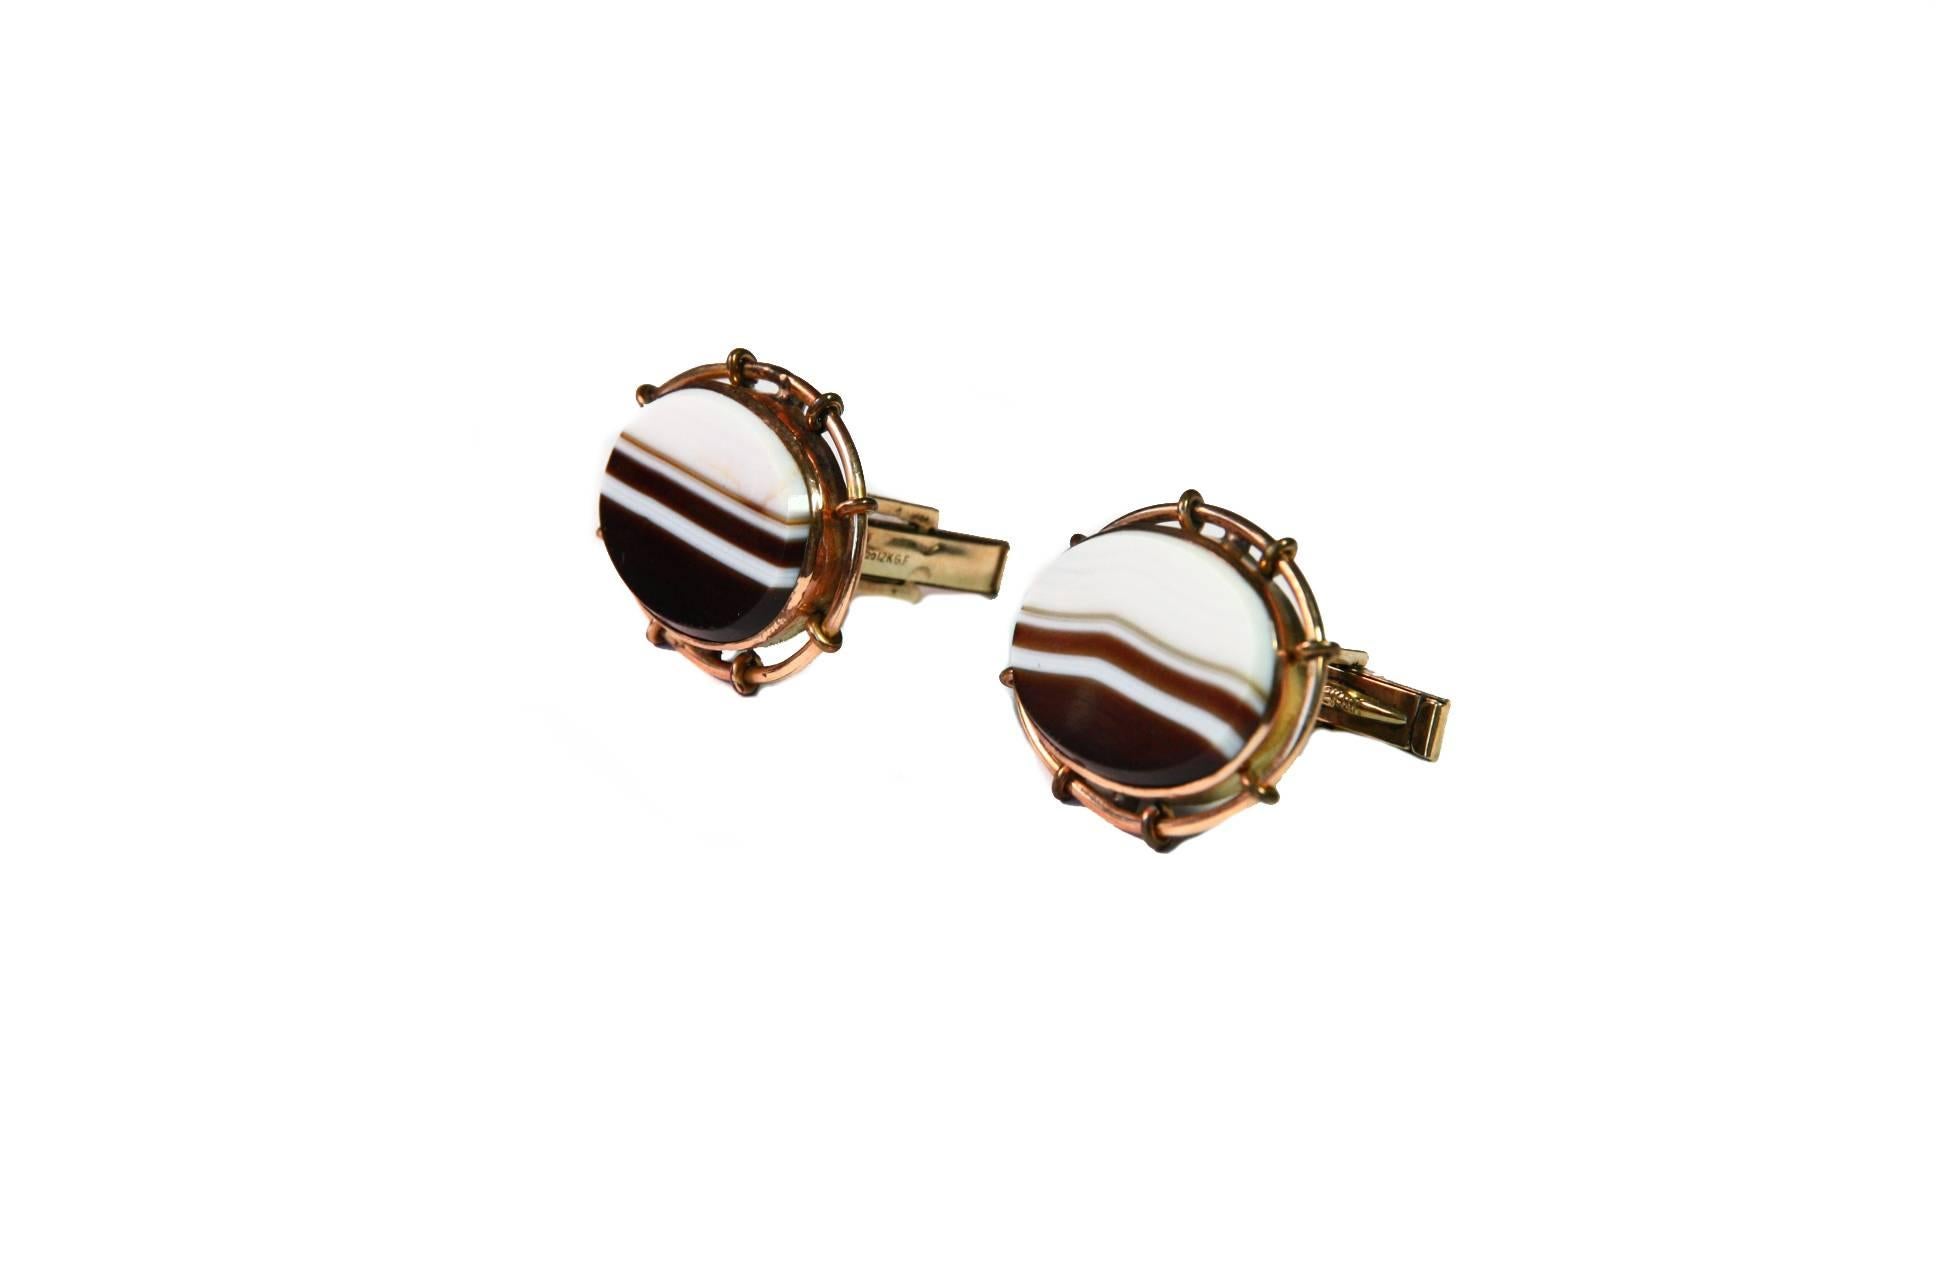 Very nice antiques victorian cufflinks in agata and 9k Gold.
All Giulia Colussi jewelry is new and has never been previously owned or worn. Each item will arrive at your door beautifully gift wrapped in our boxes, put inside an elegant pouch or